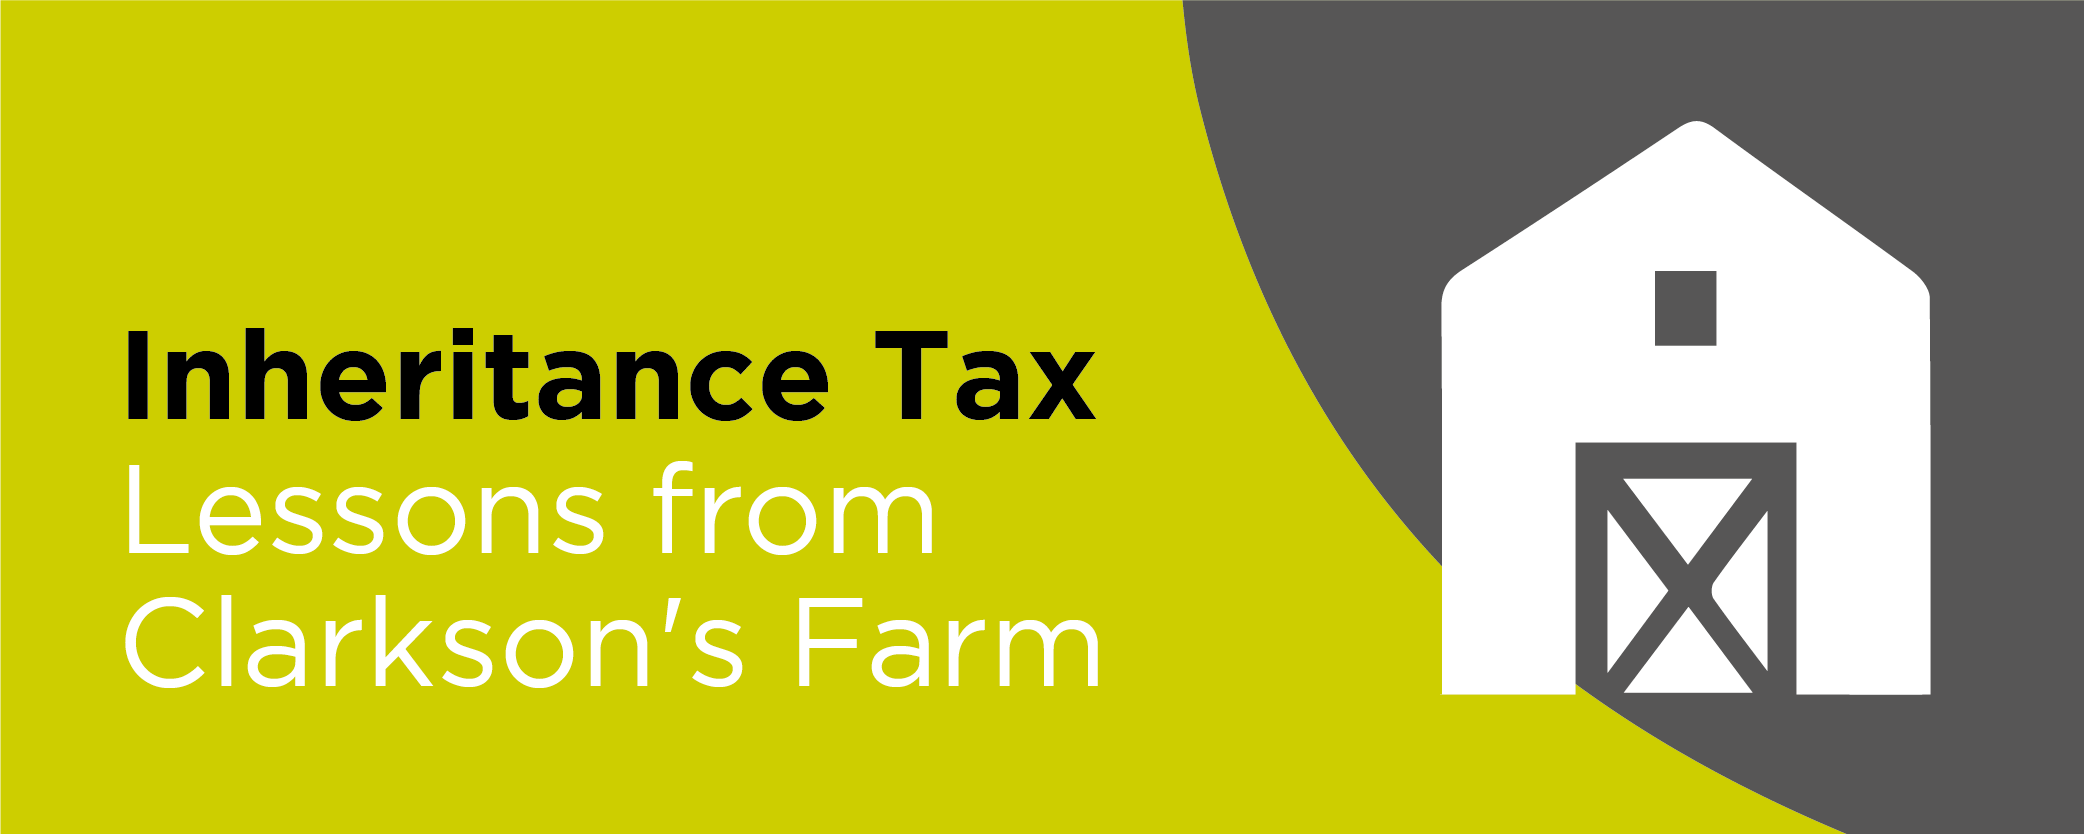 Inheritance Tax: Lessons from Clarksons Farm